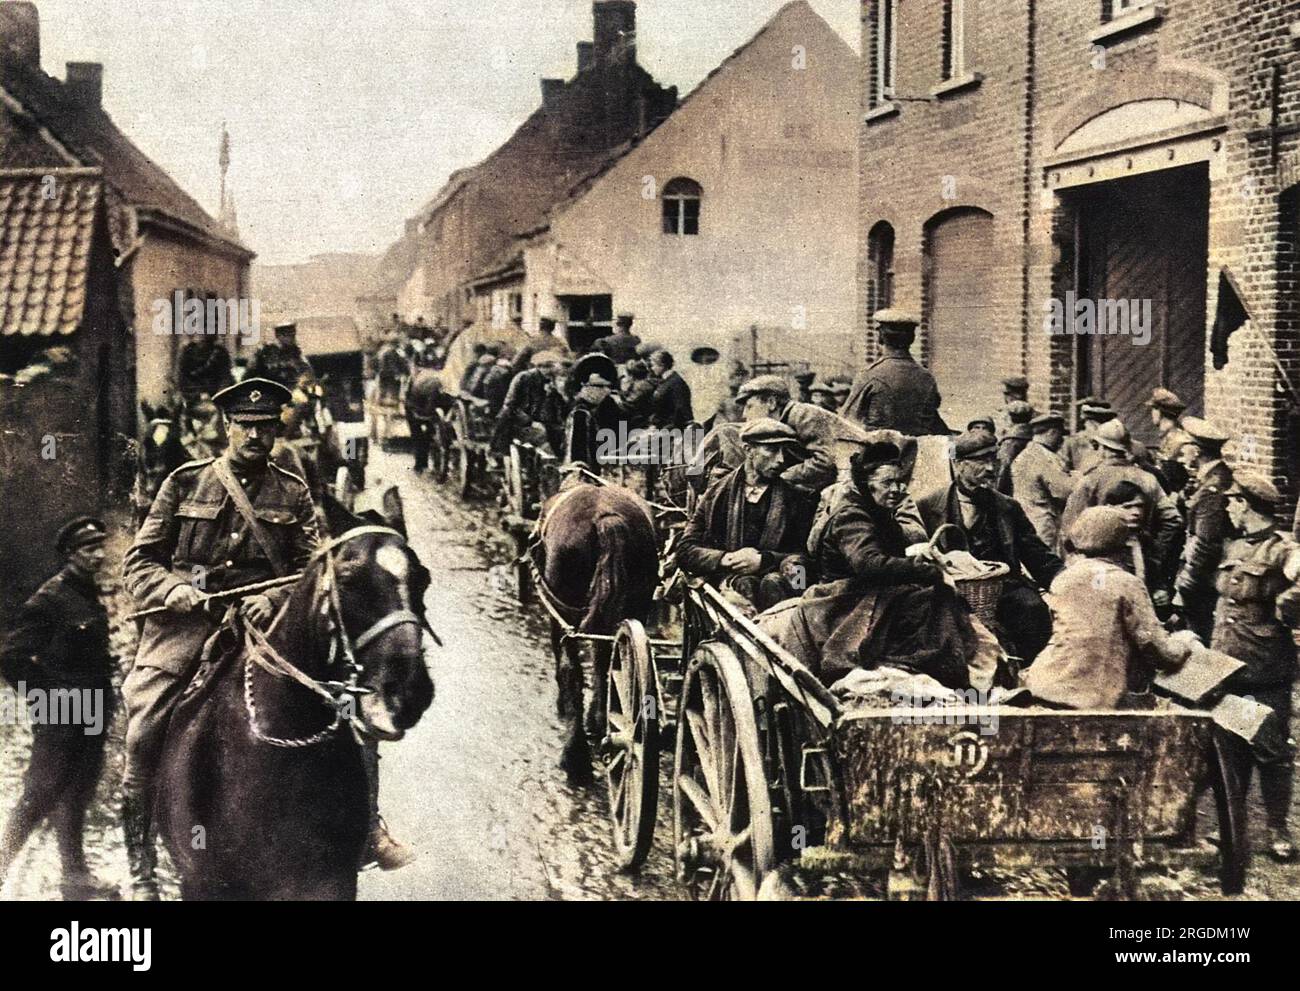 Liberation: the freeing of the civil population. Rescued after living for four years in the enemy lines: a party of French refugees being conveyed to safety in Northern France after cessation of hostilites in World War One. Stock Photo